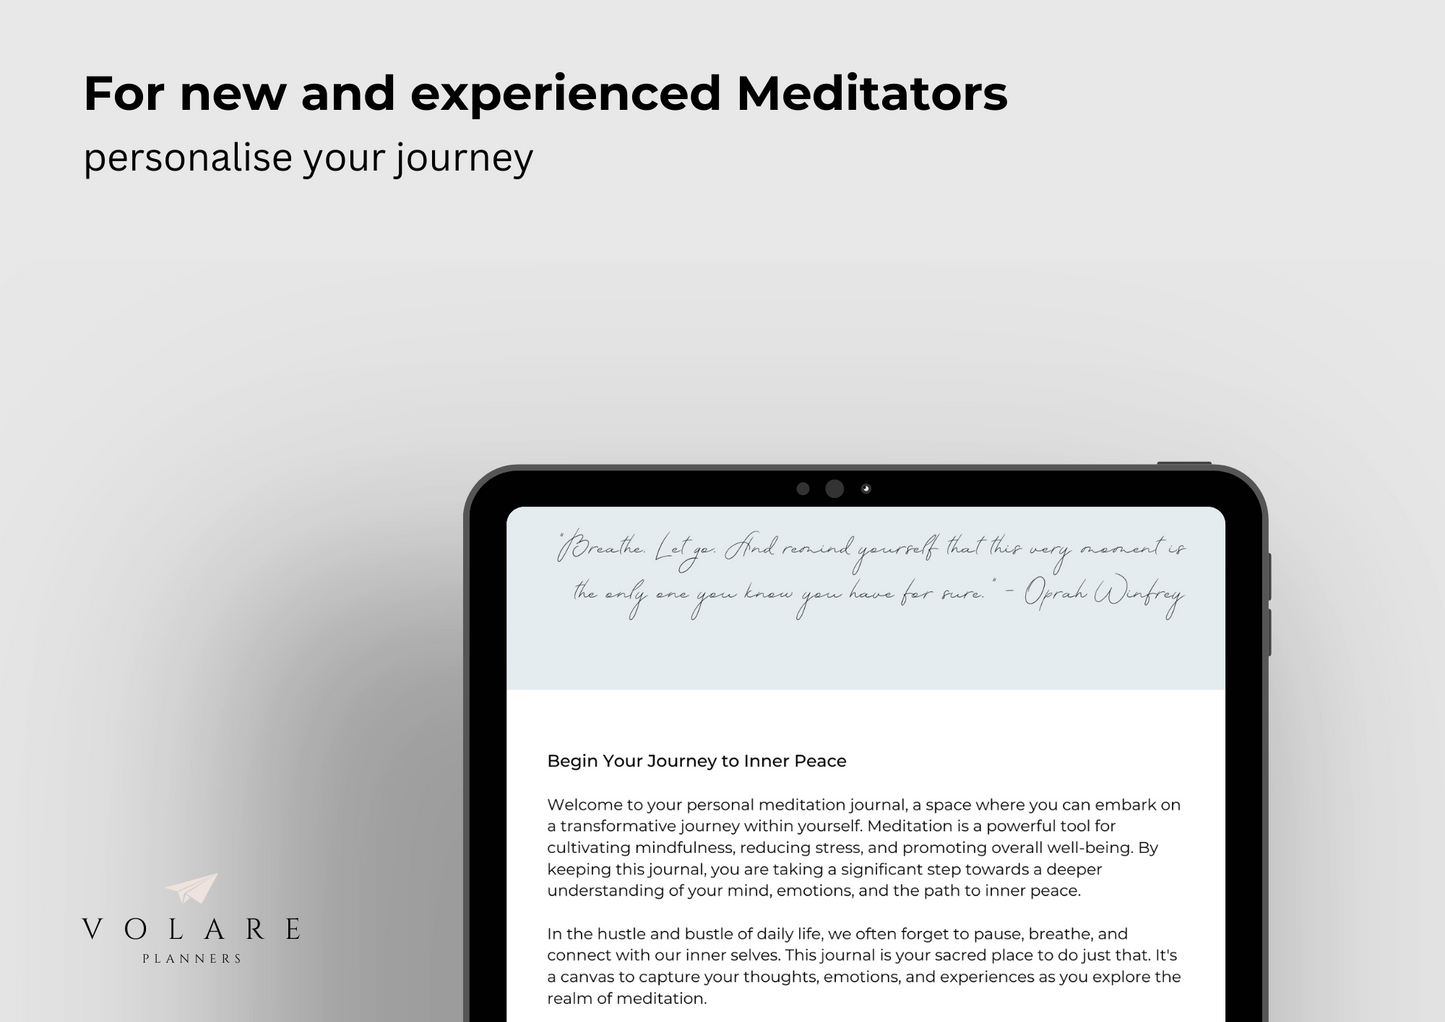 Meditation Planner by Volare Planners - Digital and Printable - Mandala